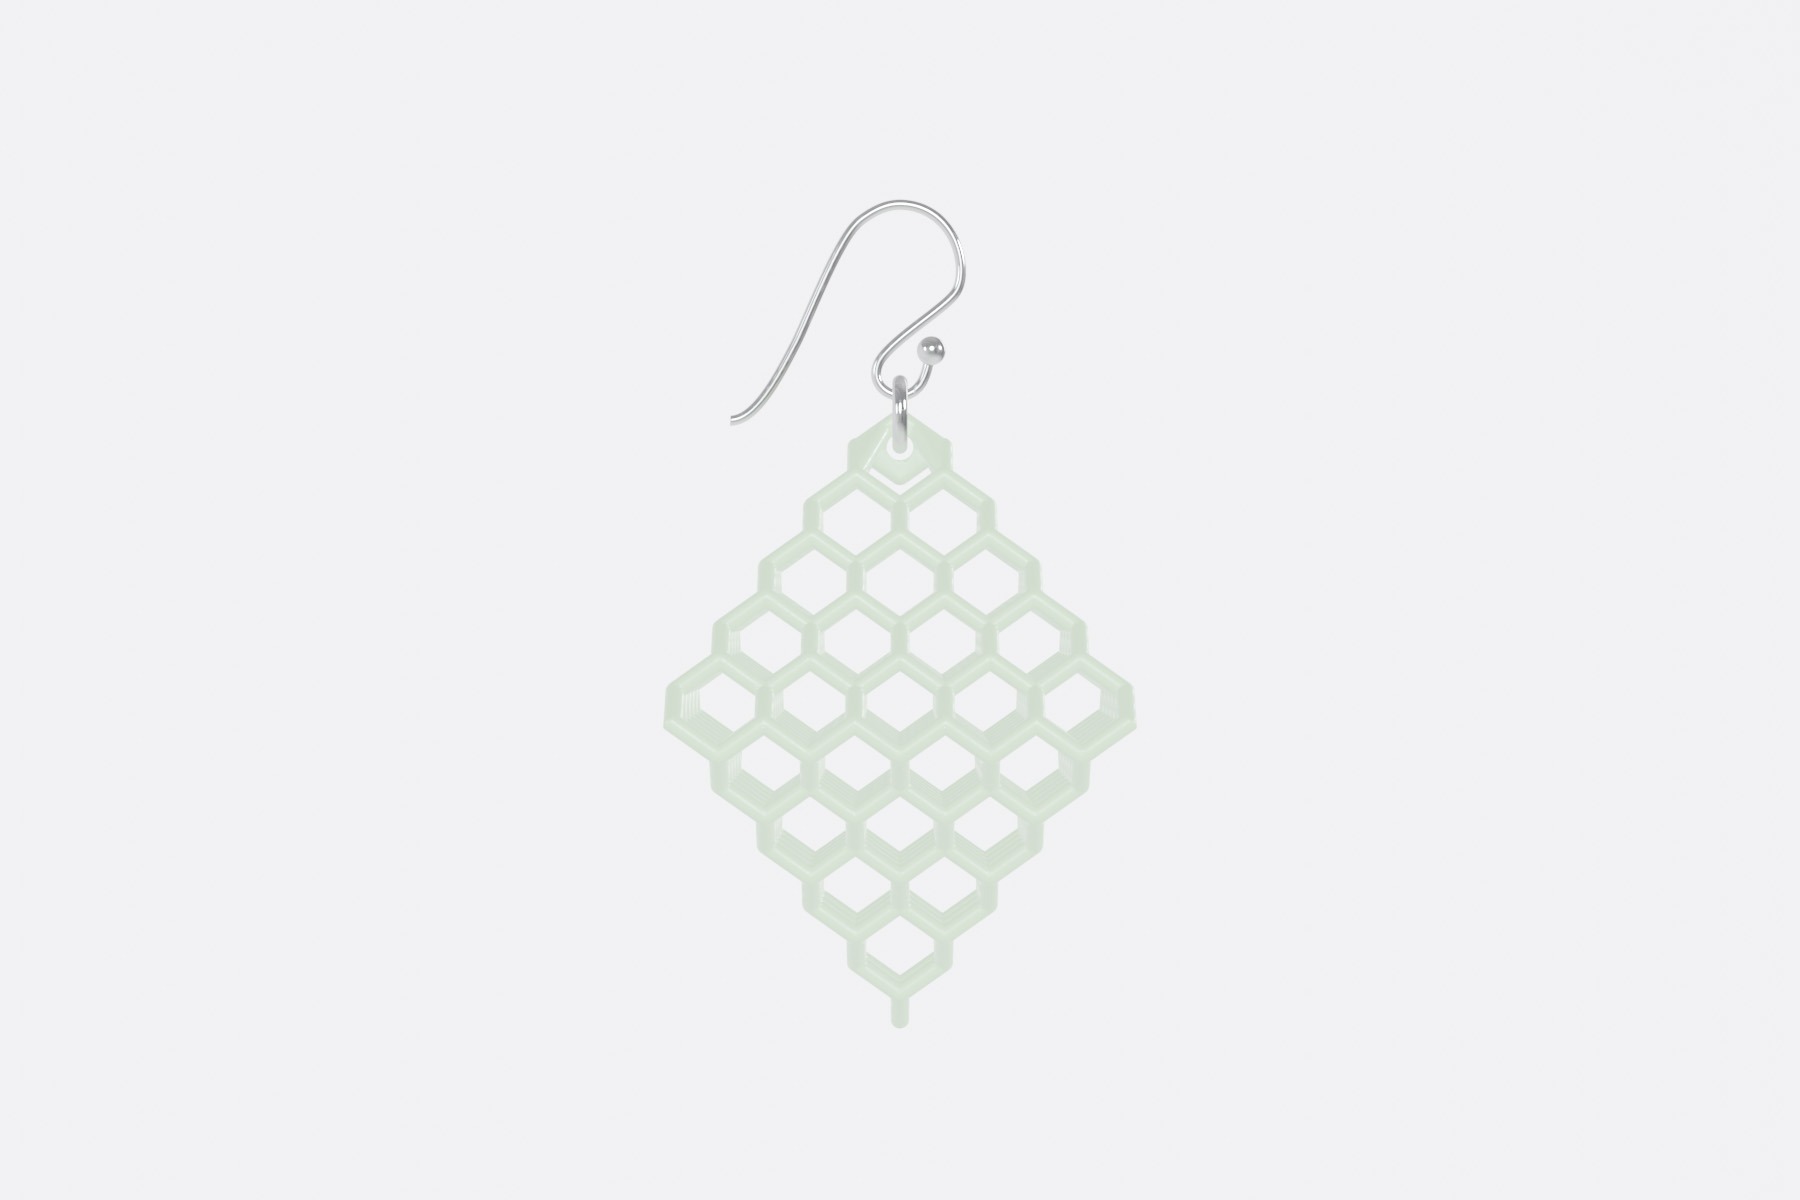 Geometric glow in the dark earring - Green - 5 Cell - Front View - Daylight